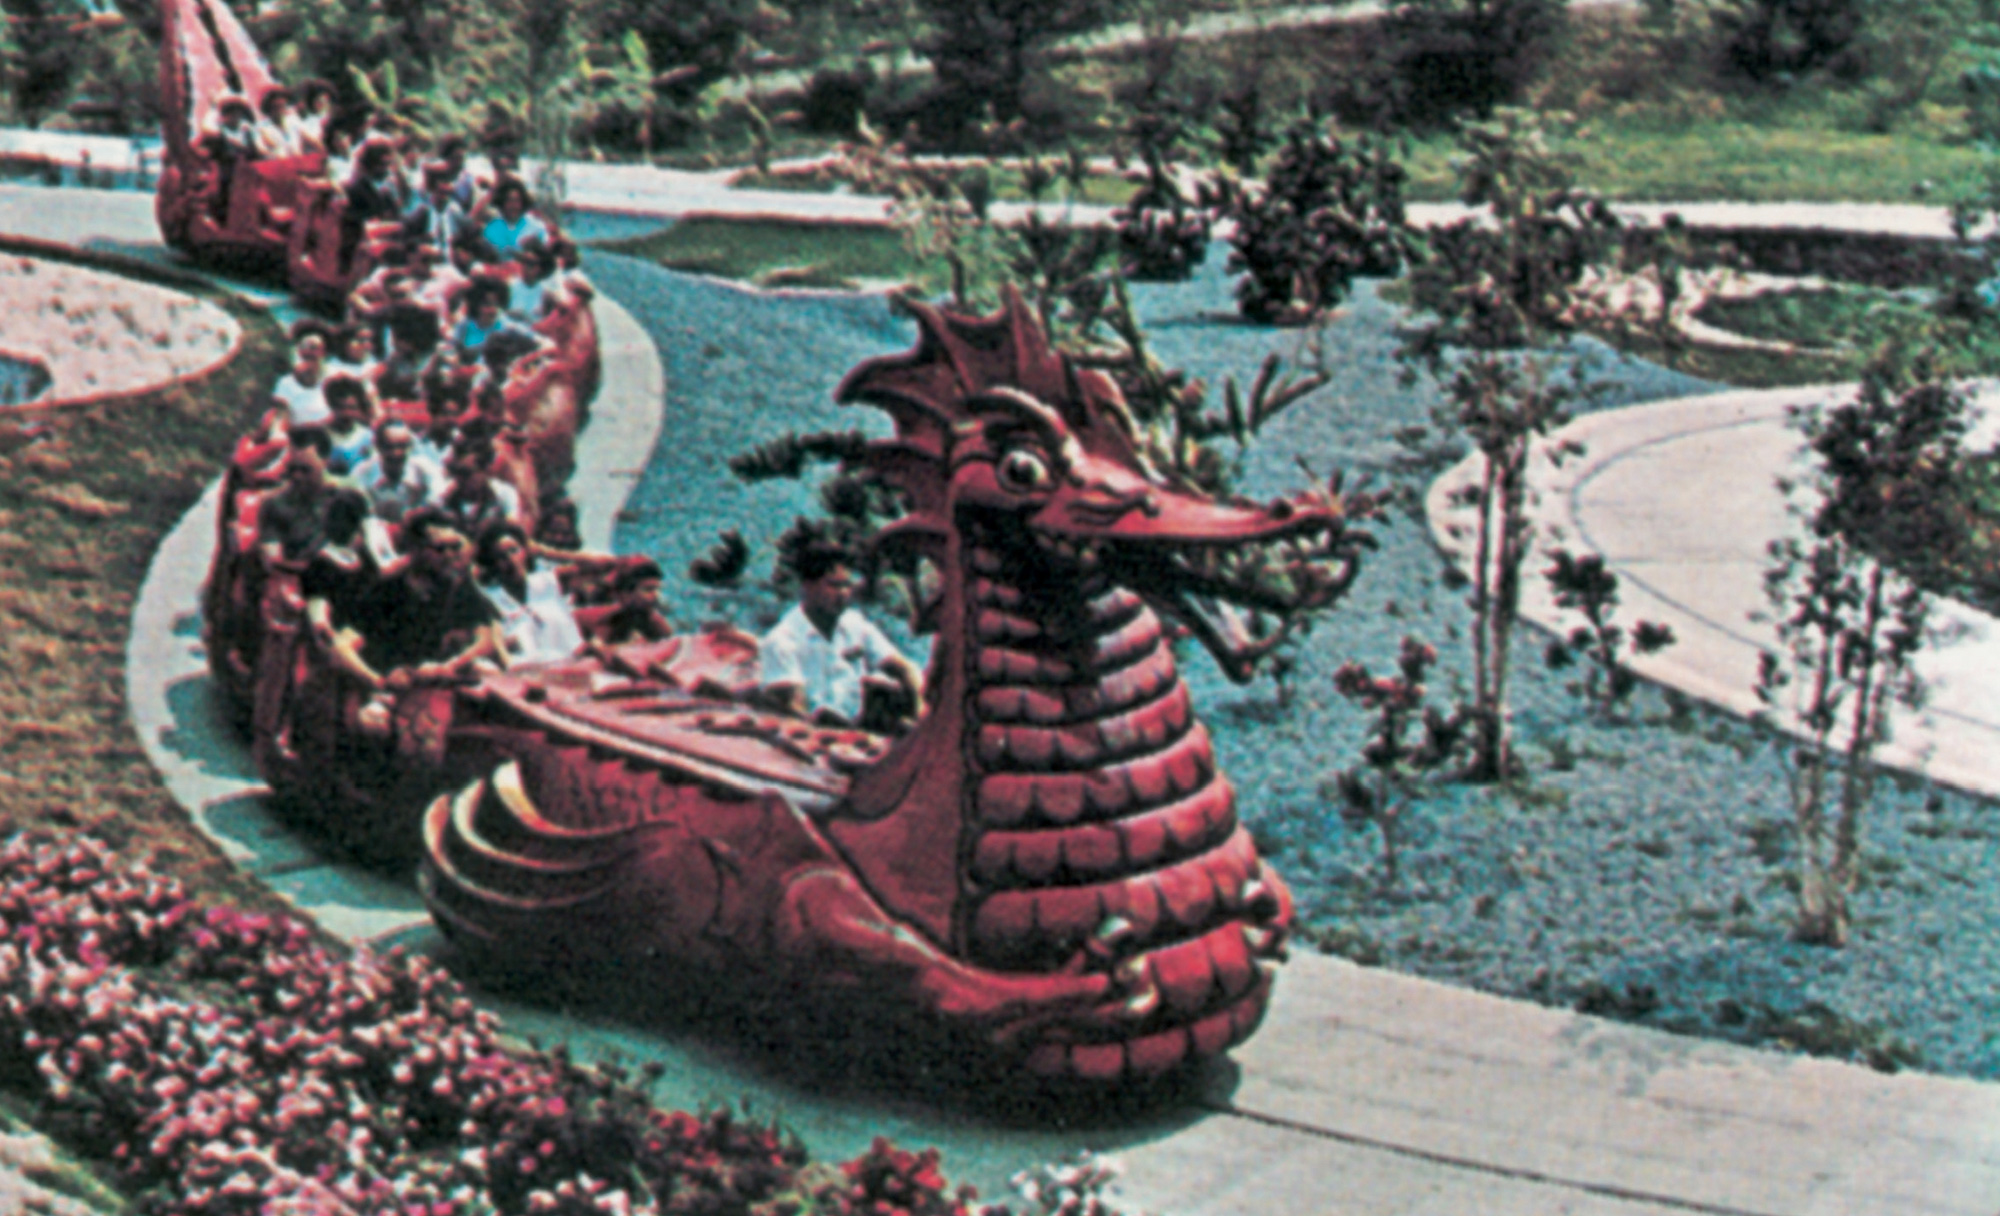 A photograph of Danny the Dragon as he appeared in a guidebook from circa 1960.